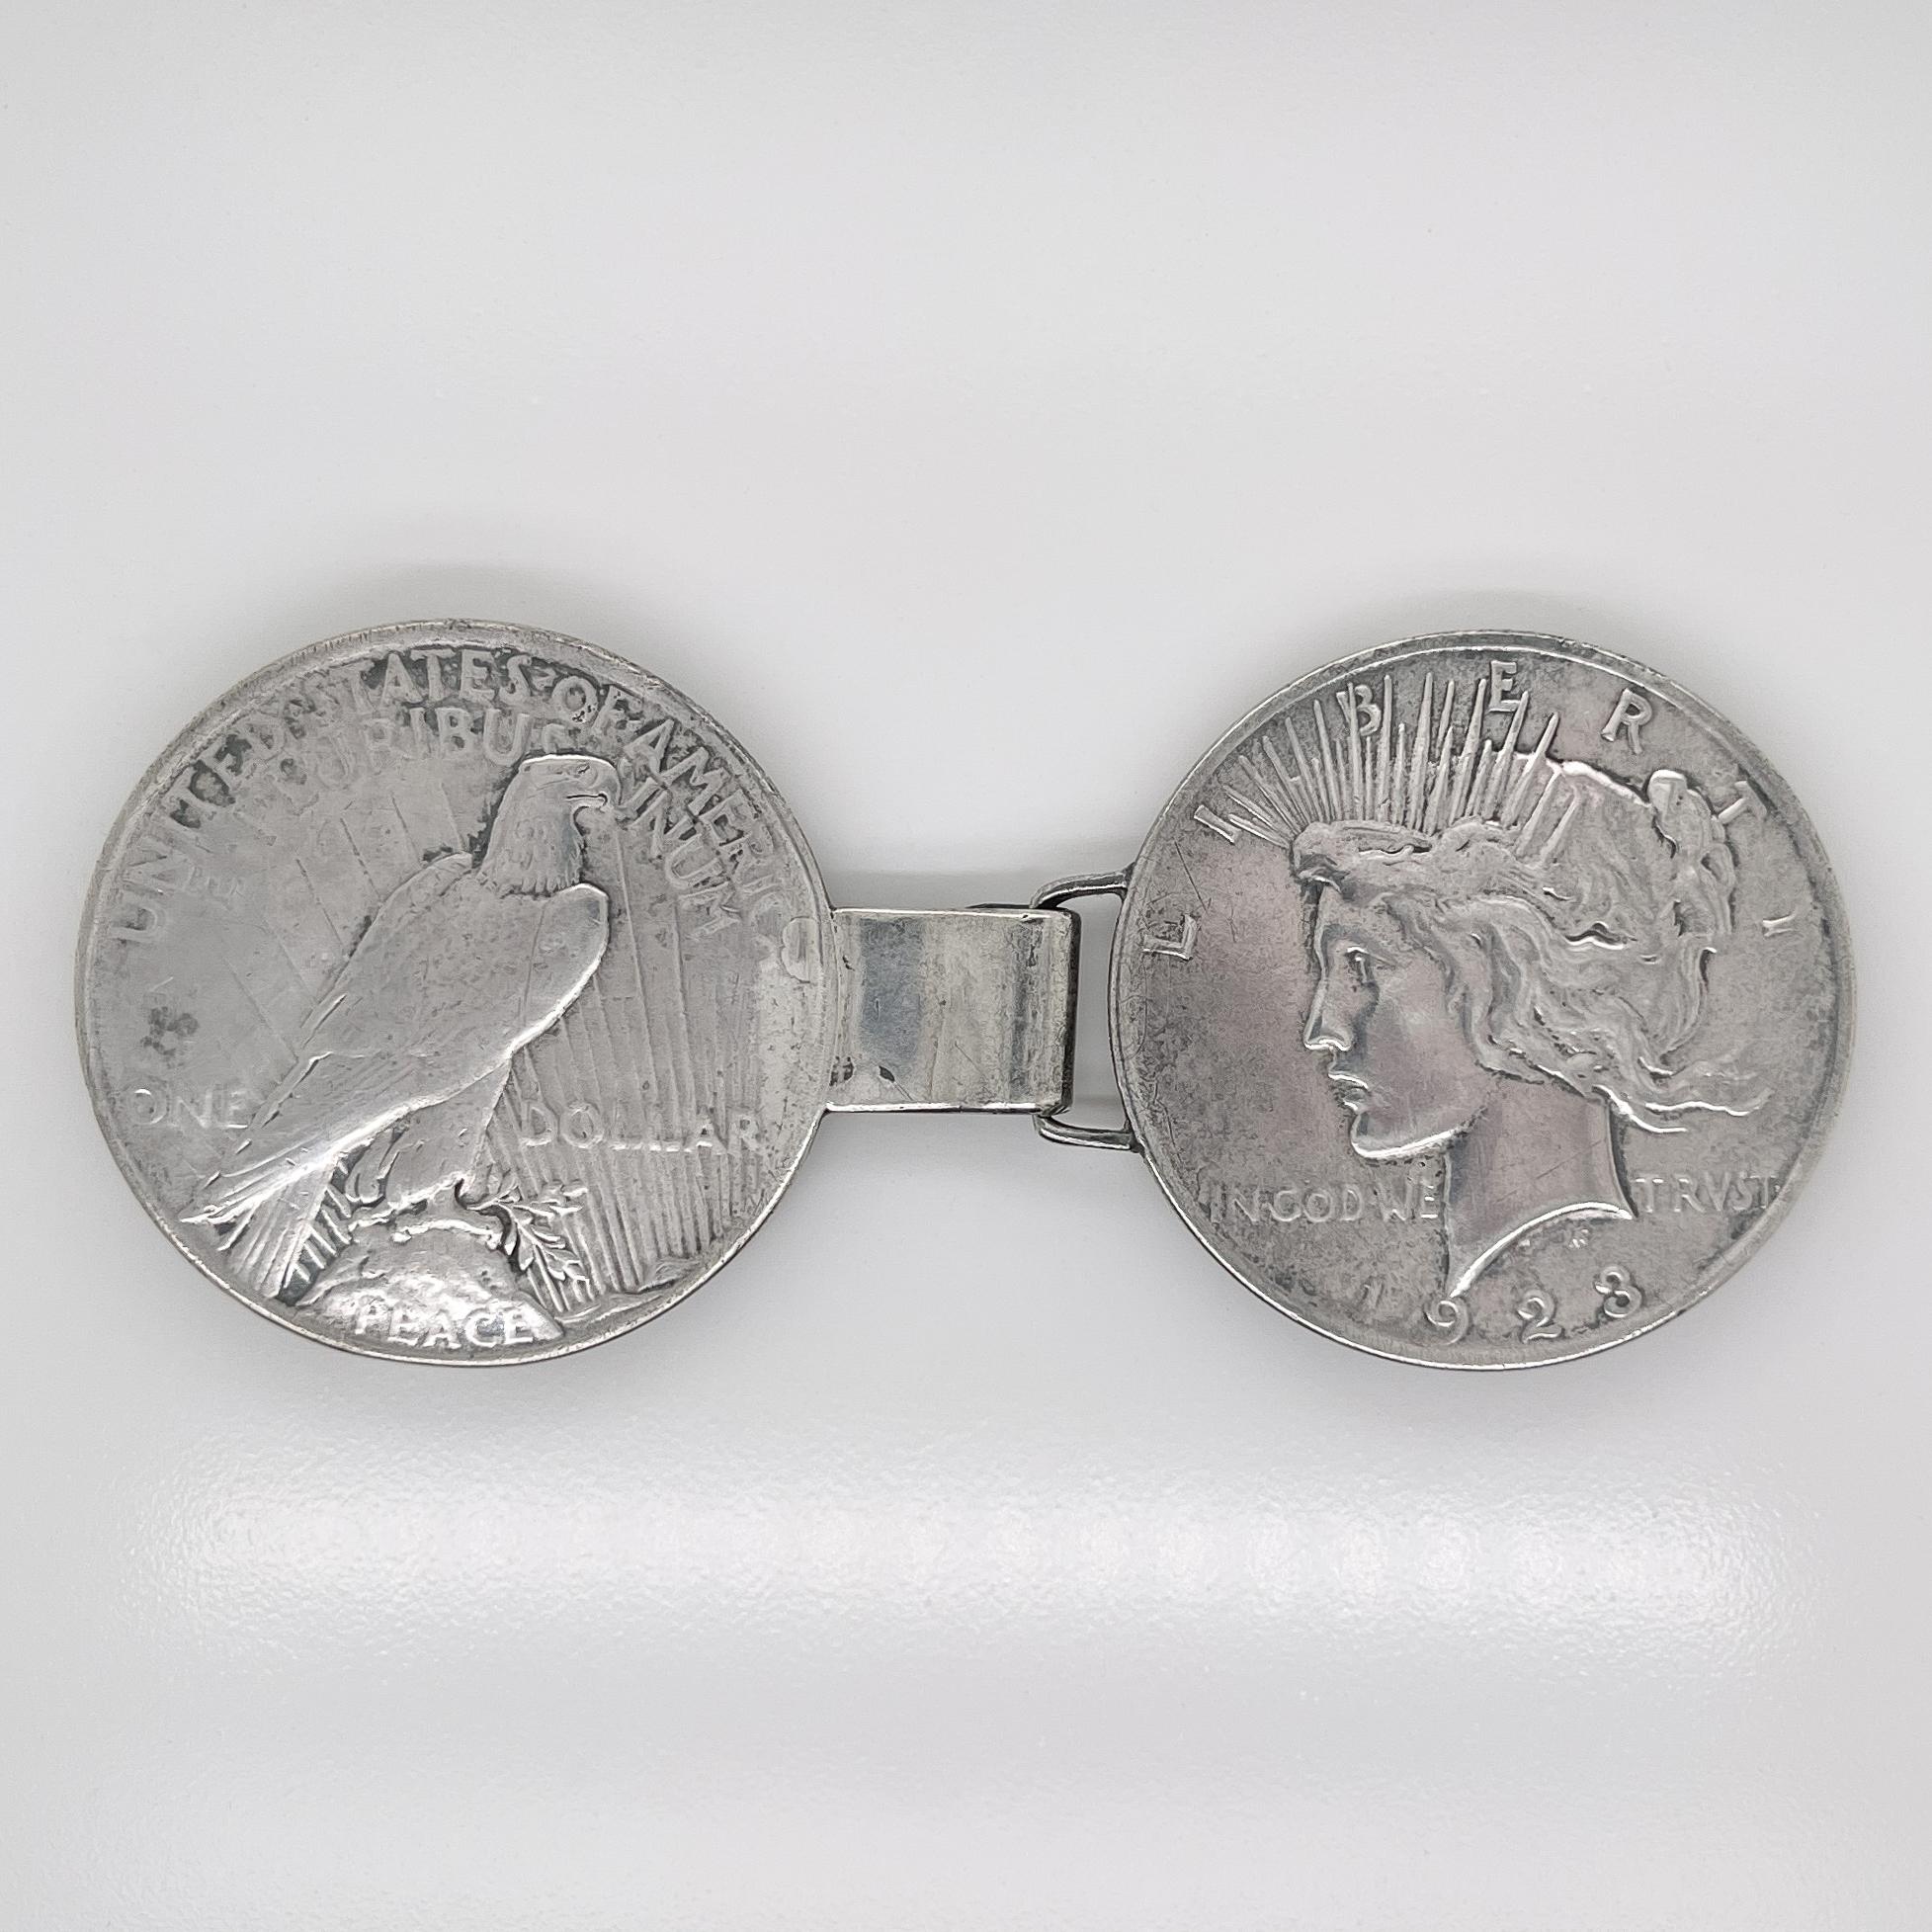 A fine antique folk art belt buckle.

Consisting of 2 Liberty Peace silver dollar coins. One is marked for 1923.

Each fitted with a loop for securing a belt. 

Fastened with an eye and hook closure. 

Simply a great one of a kind 'American Folk